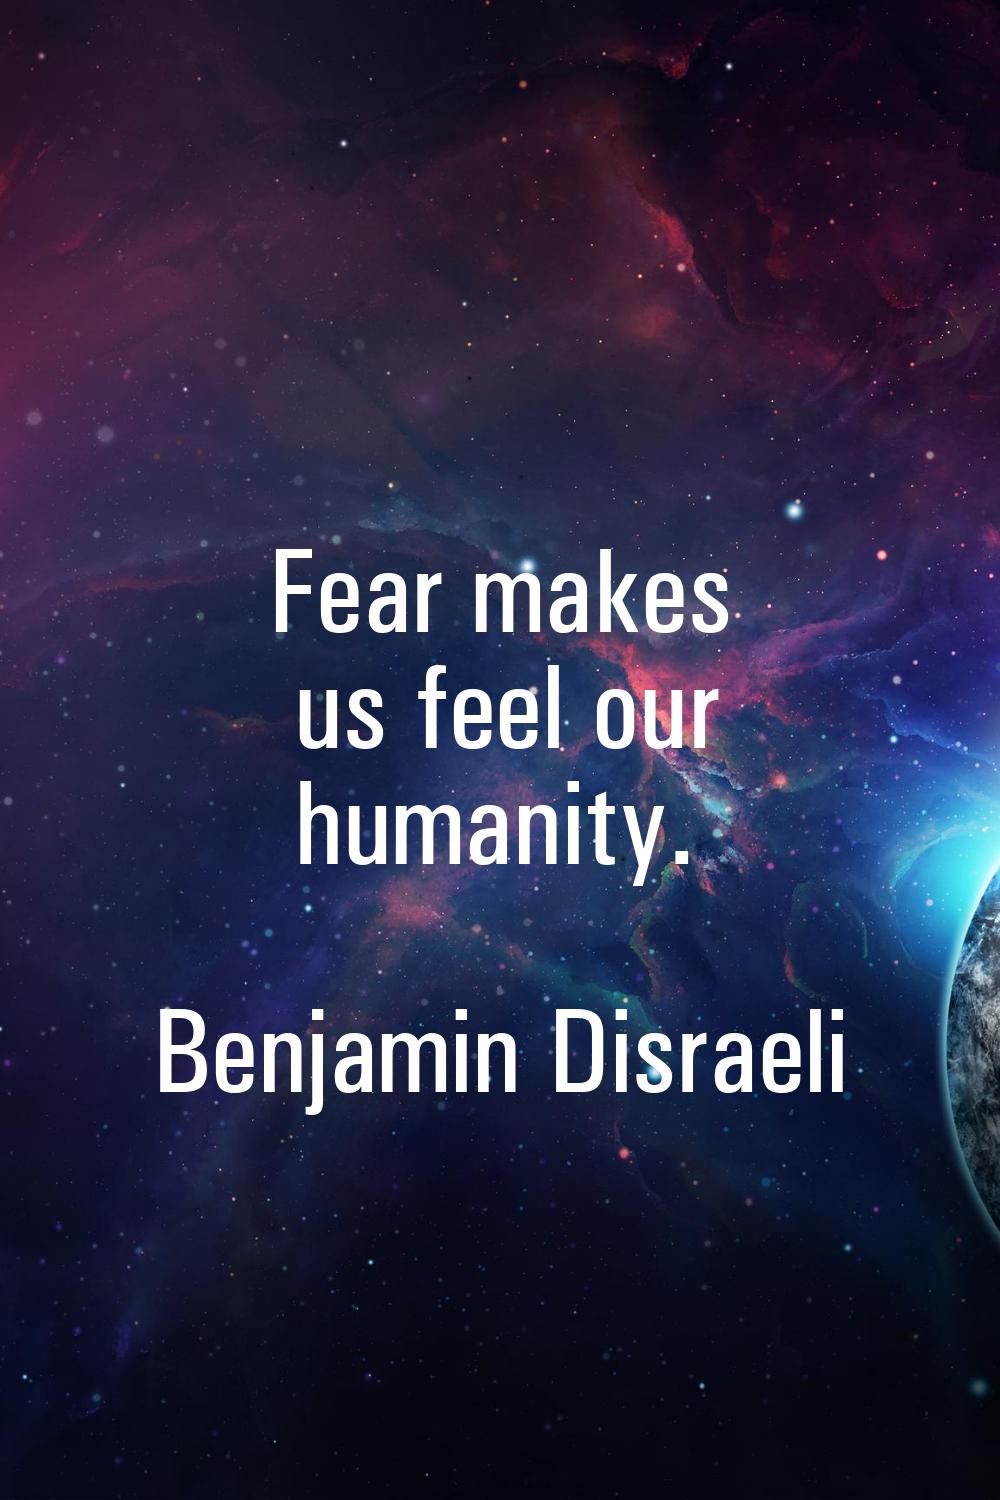 Fear makes us feel our humanity.